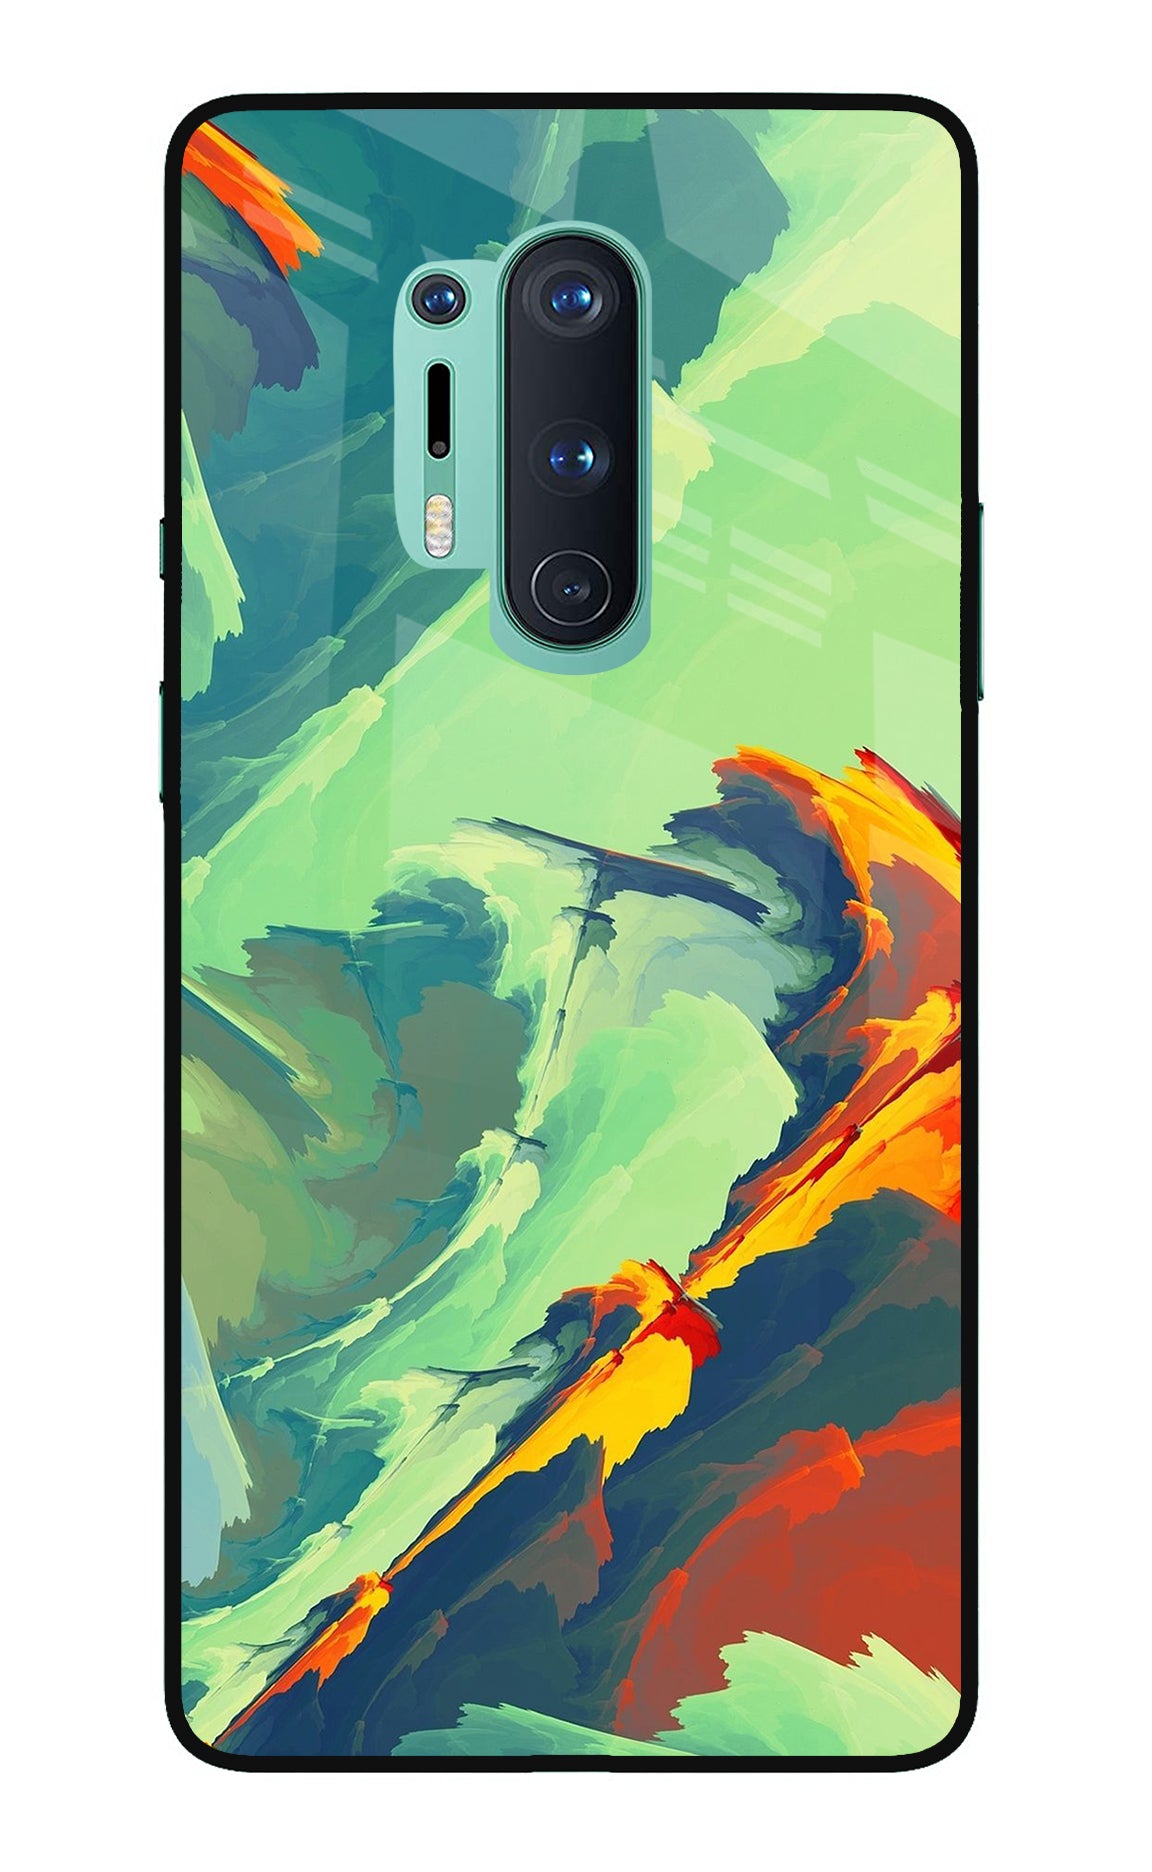 Paint Art Oneplus 8 Pro Back Cover